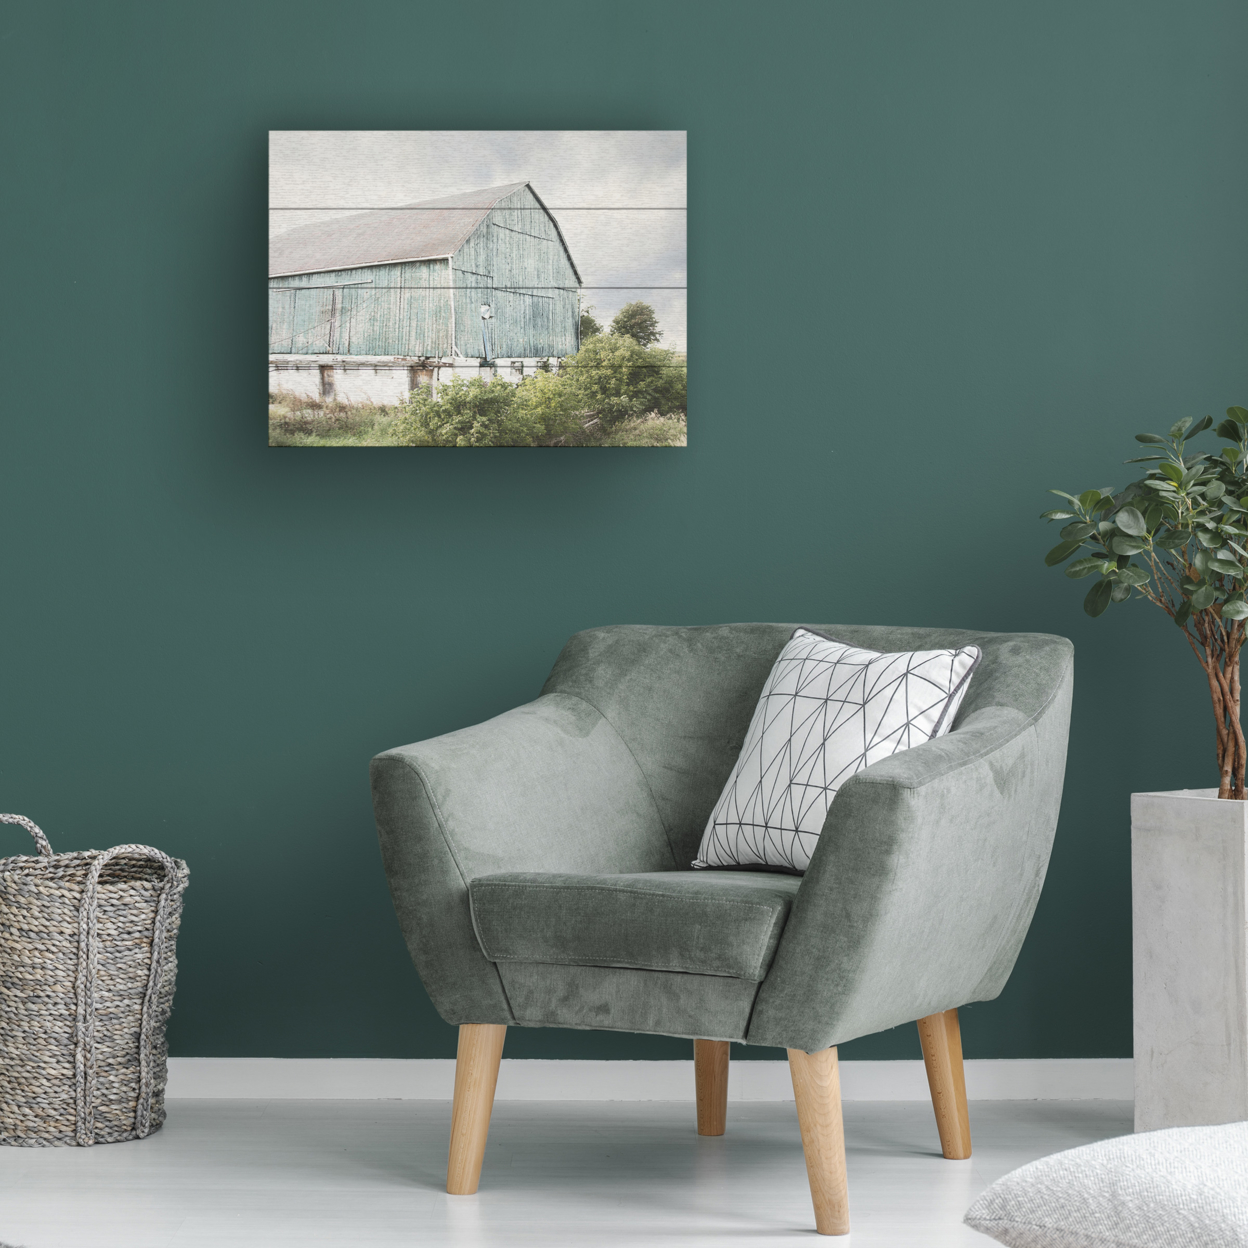 Wall Art 12 X 16 Inches Titled Late Summer Barn I Crop Ready To Hang Printed On Wooden Planks